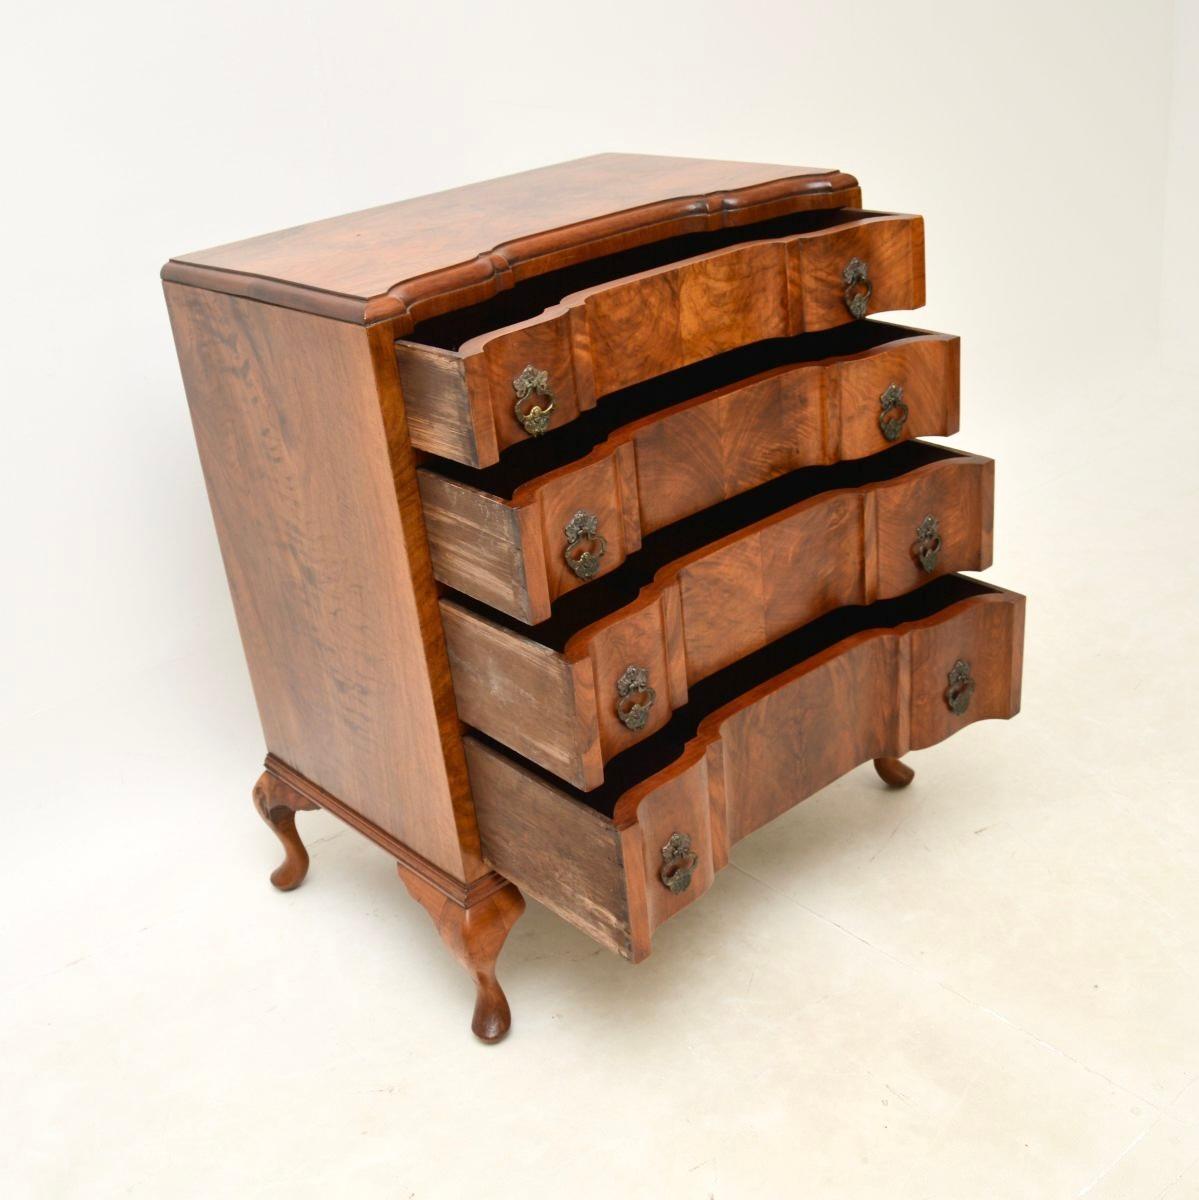 An absolutely stunning antique figured walnut chest of drawers. This was made in England, it dates from around the 1890-1910 period.

It is of extremely fine quality, with a beautifully shaped front, sitting on short cabriole legs. The drawers have